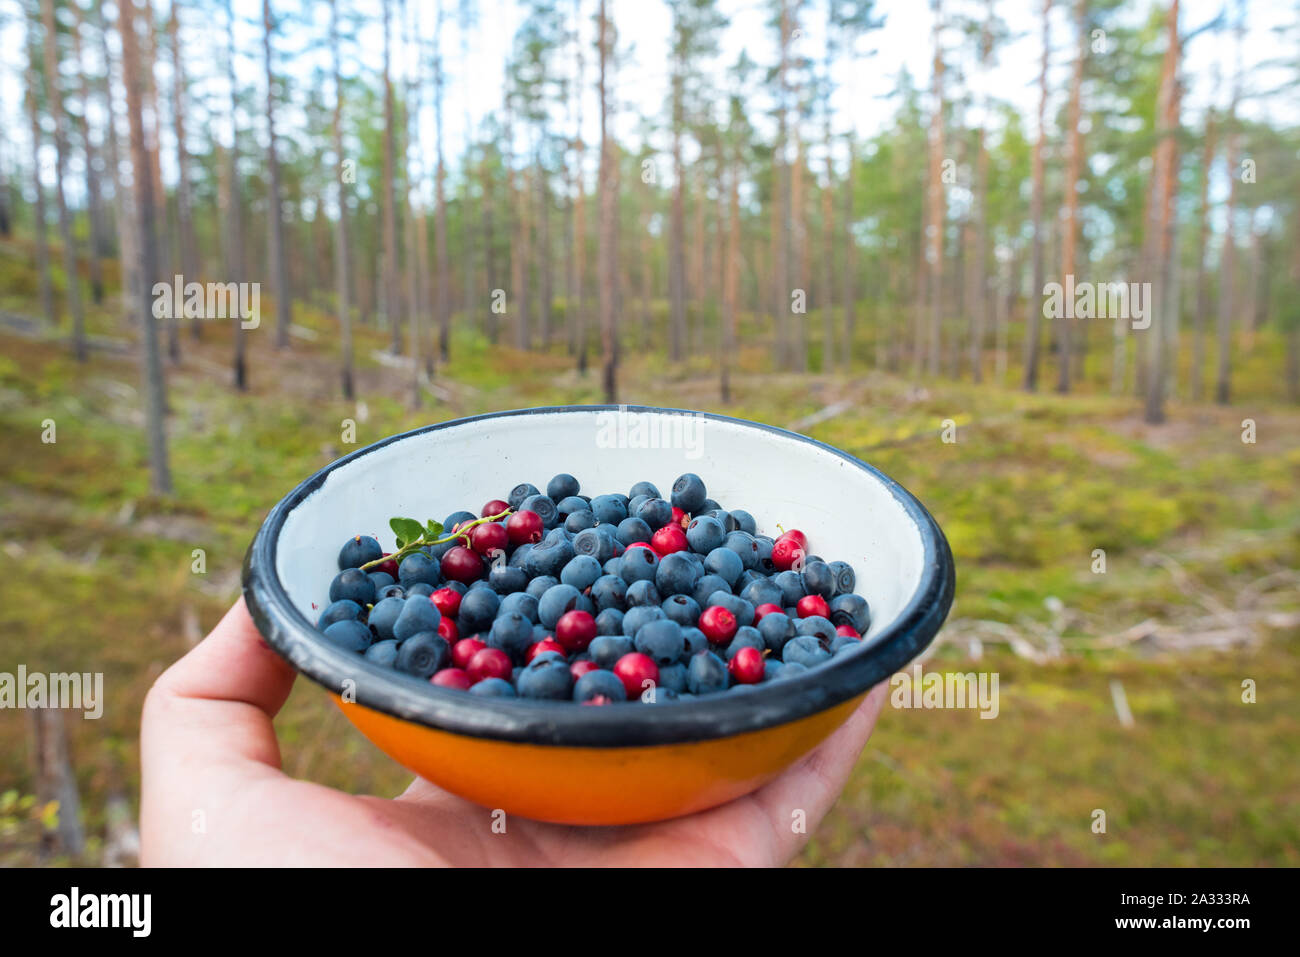 Wild blueberries (bilberries) & lingonberries collected into a plate in the pine tree forest. Foraging in the wild, back to the roots. Stock Photo